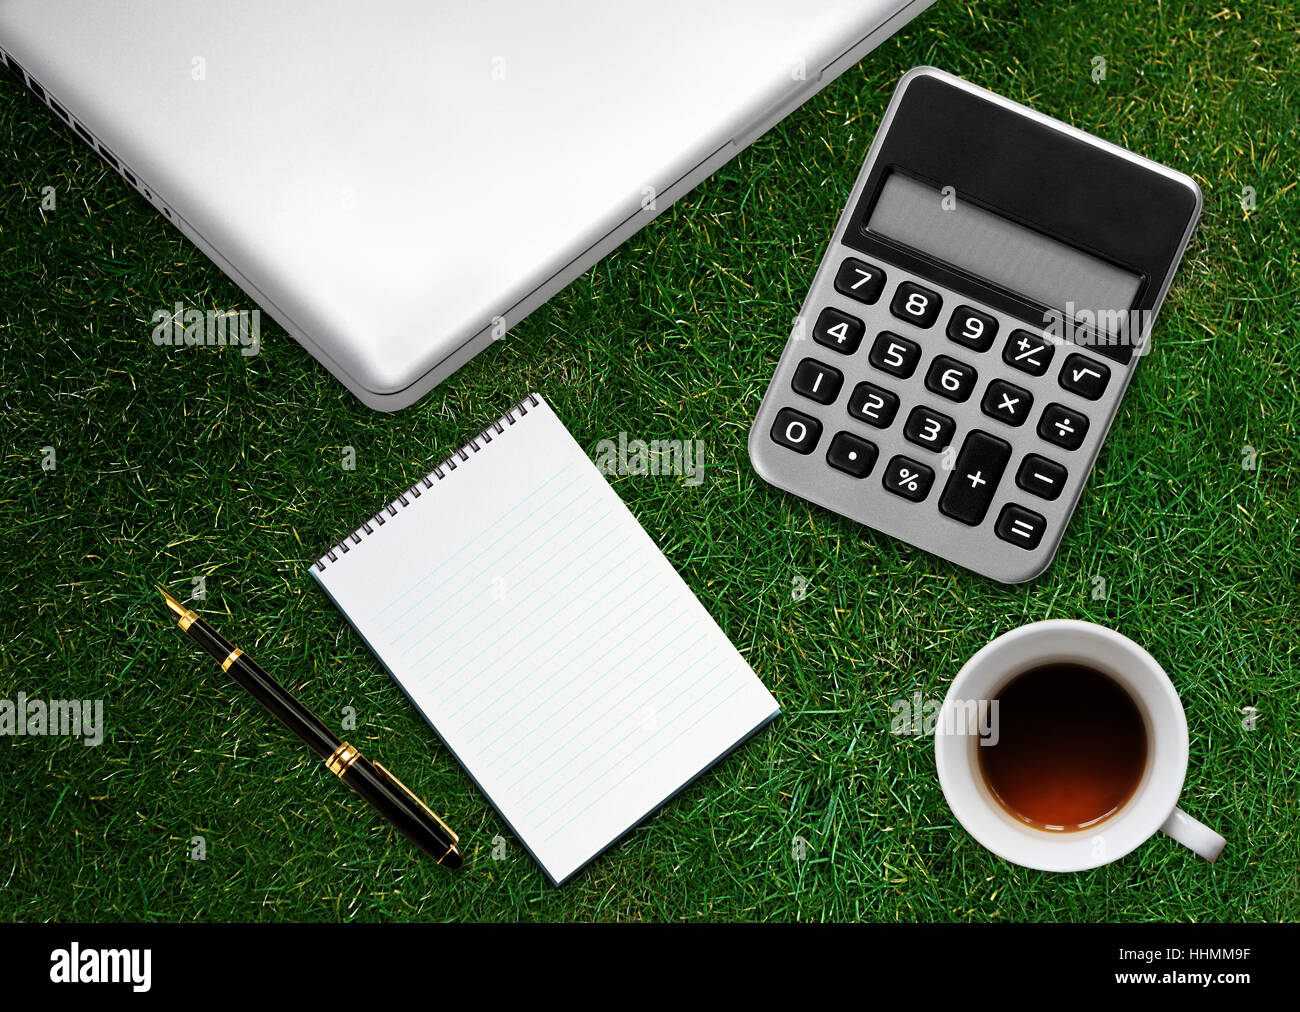 model, design, project, concept, plan, draft, idea, perspective, point of view, Stock Photo